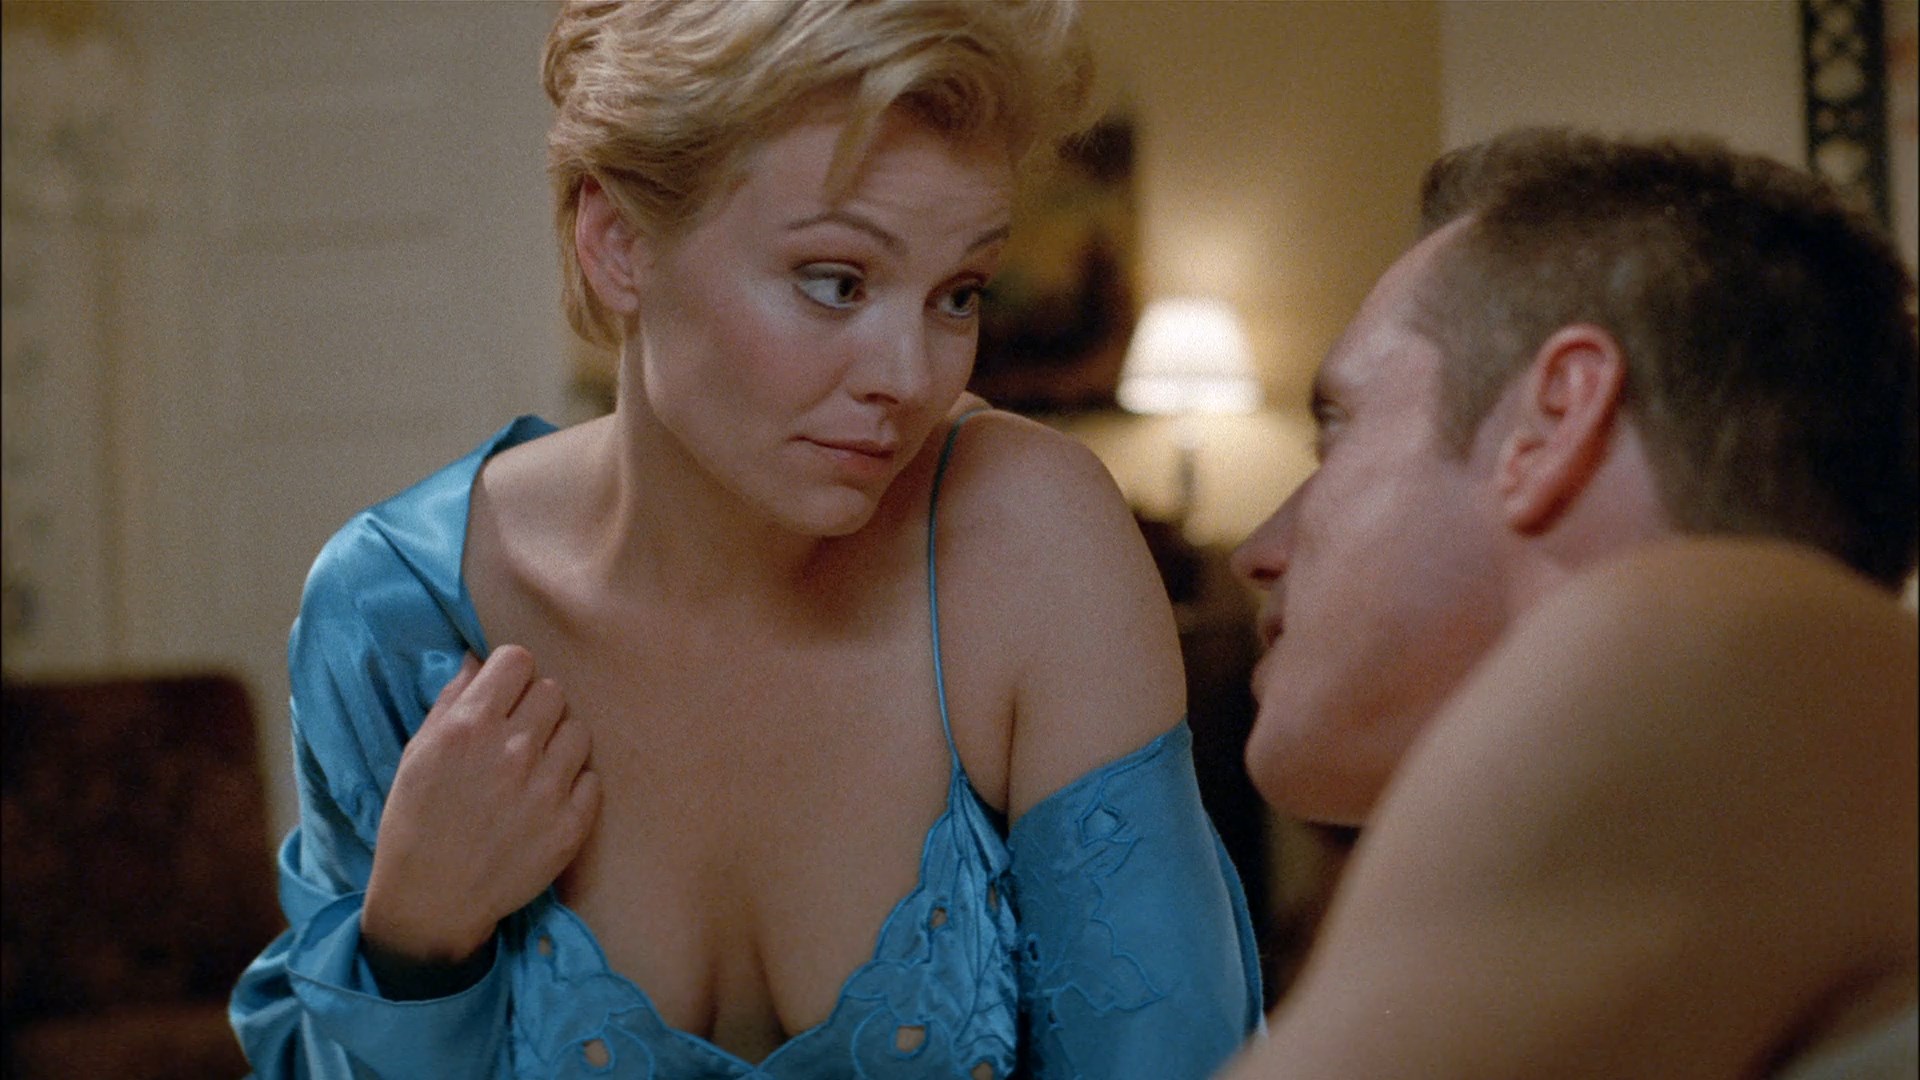 Gail O’Grady shows nice cleavage while talking to some guy.